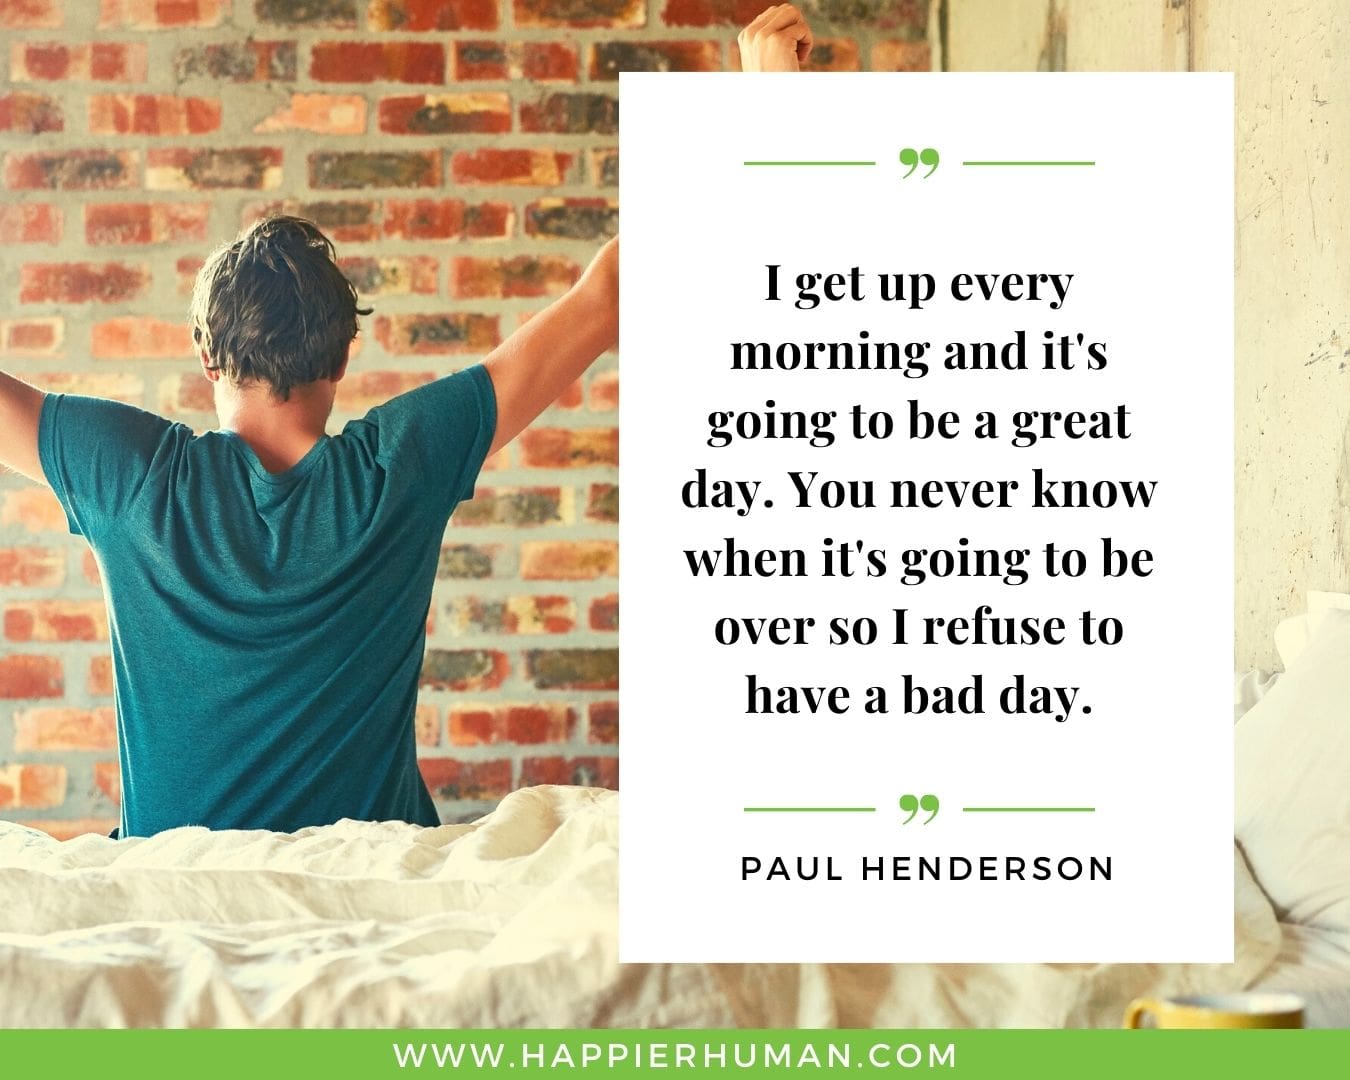 Great Day Quotes - “I get up every morning and it's going to be a great day. You never know when it's going to be over so I refuse to have a bad day.” – Paul Henderson